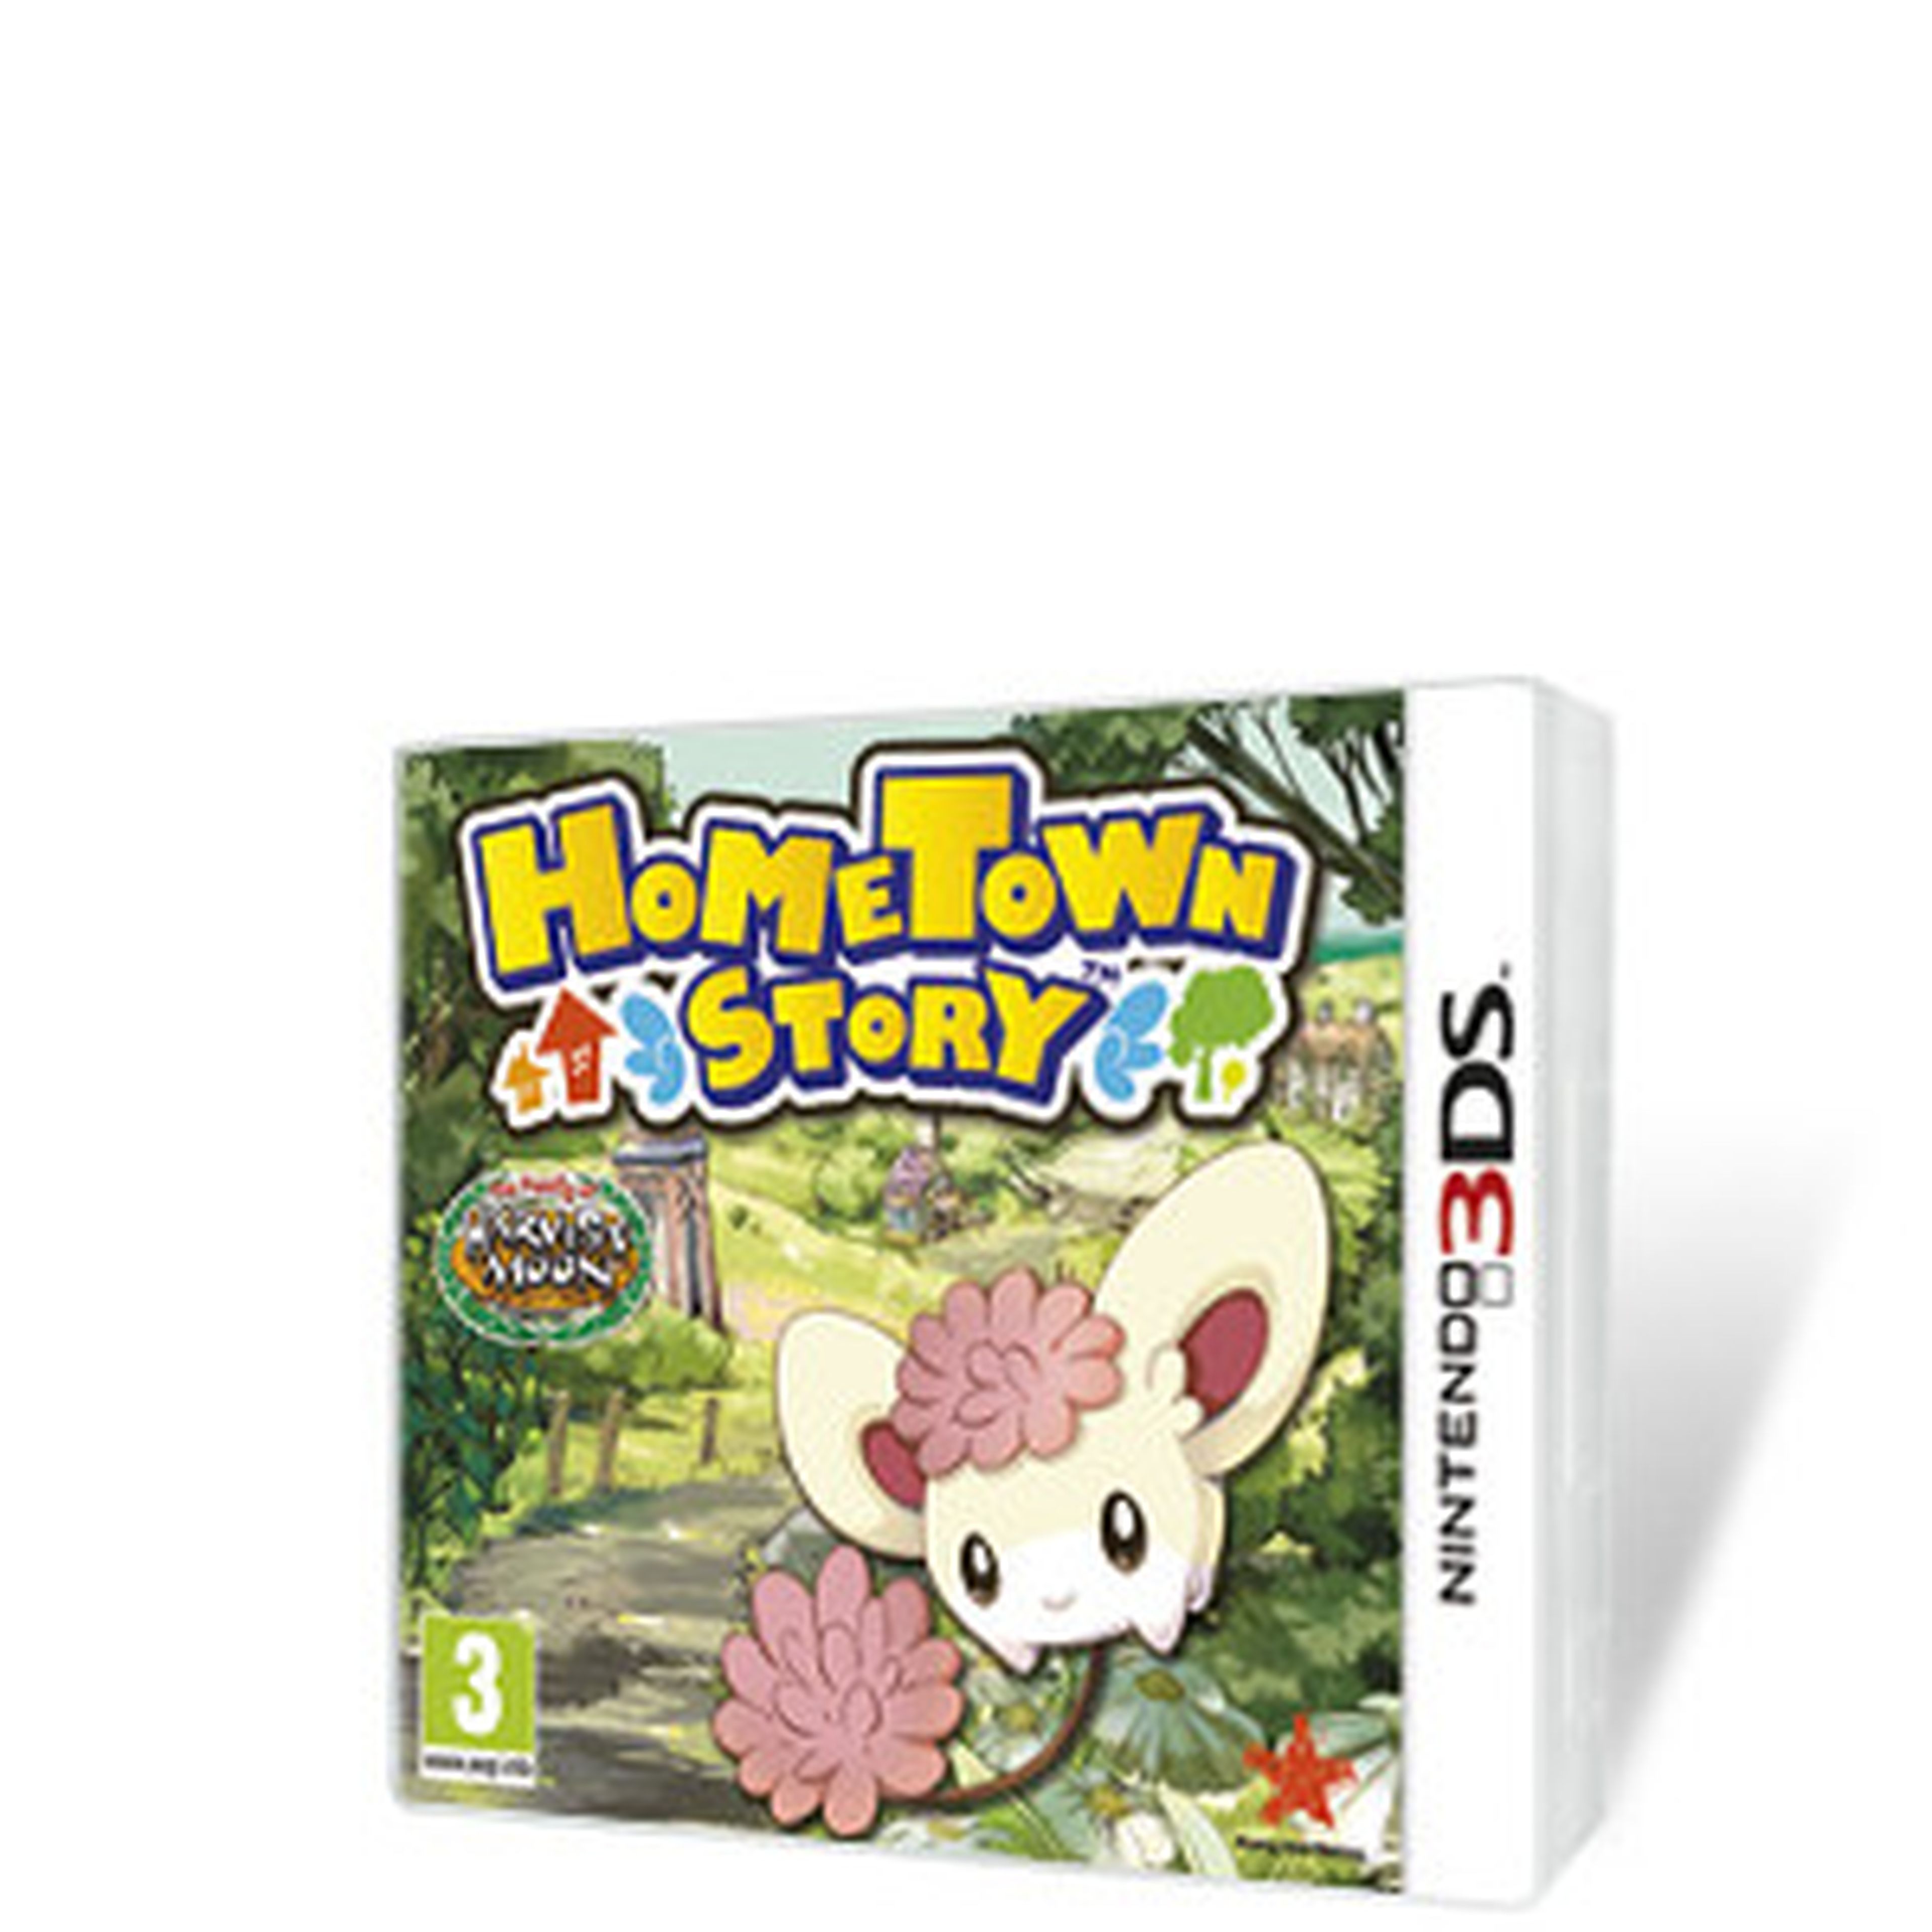 Hometown Story para 3DS